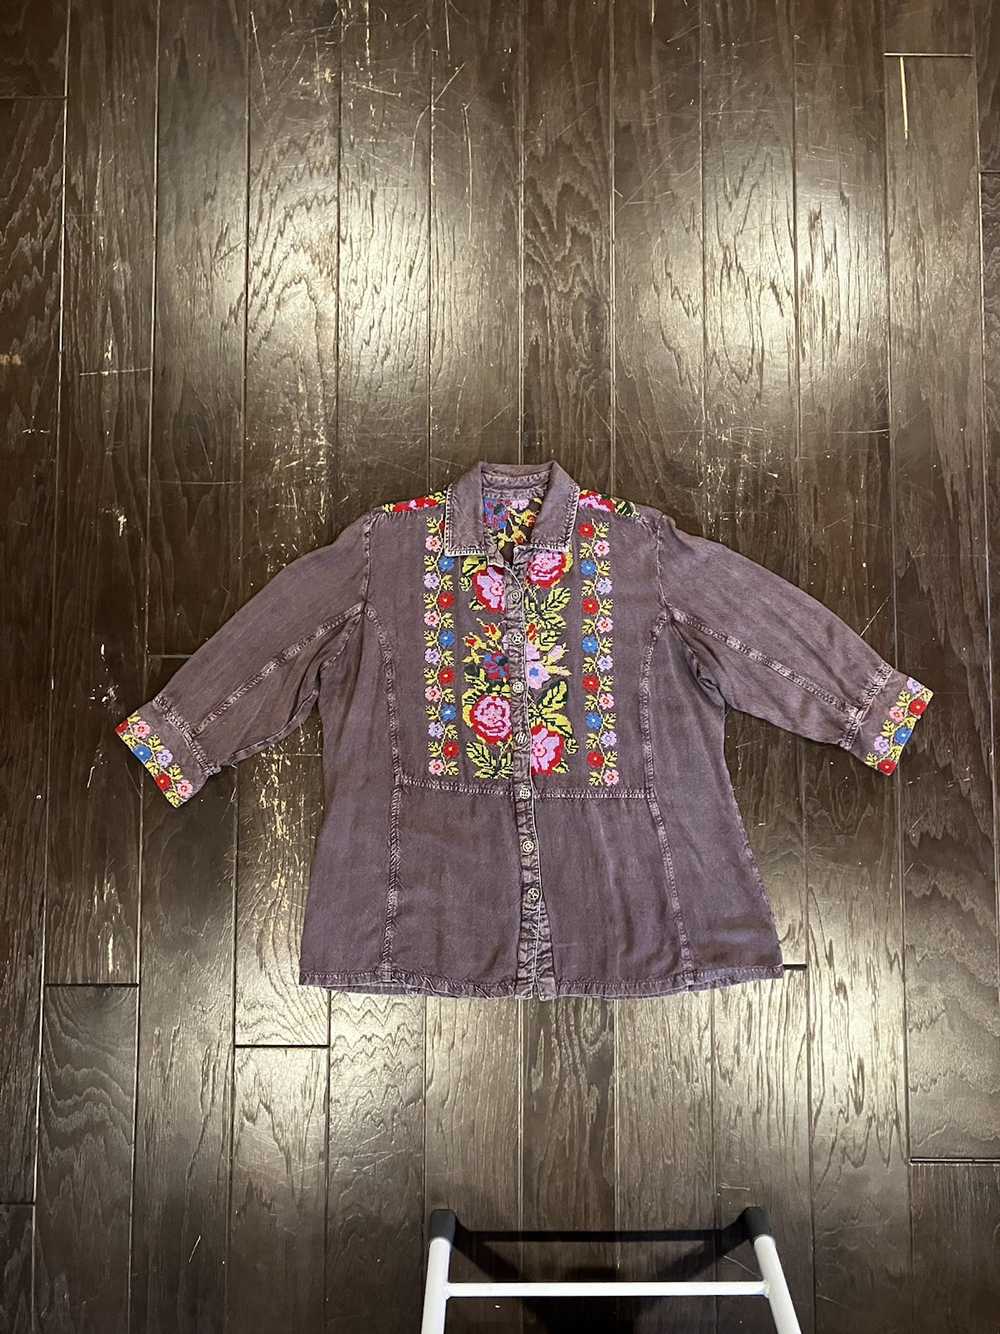 Streetwear × Vintage Cross stitched, flowers shirt - image 1